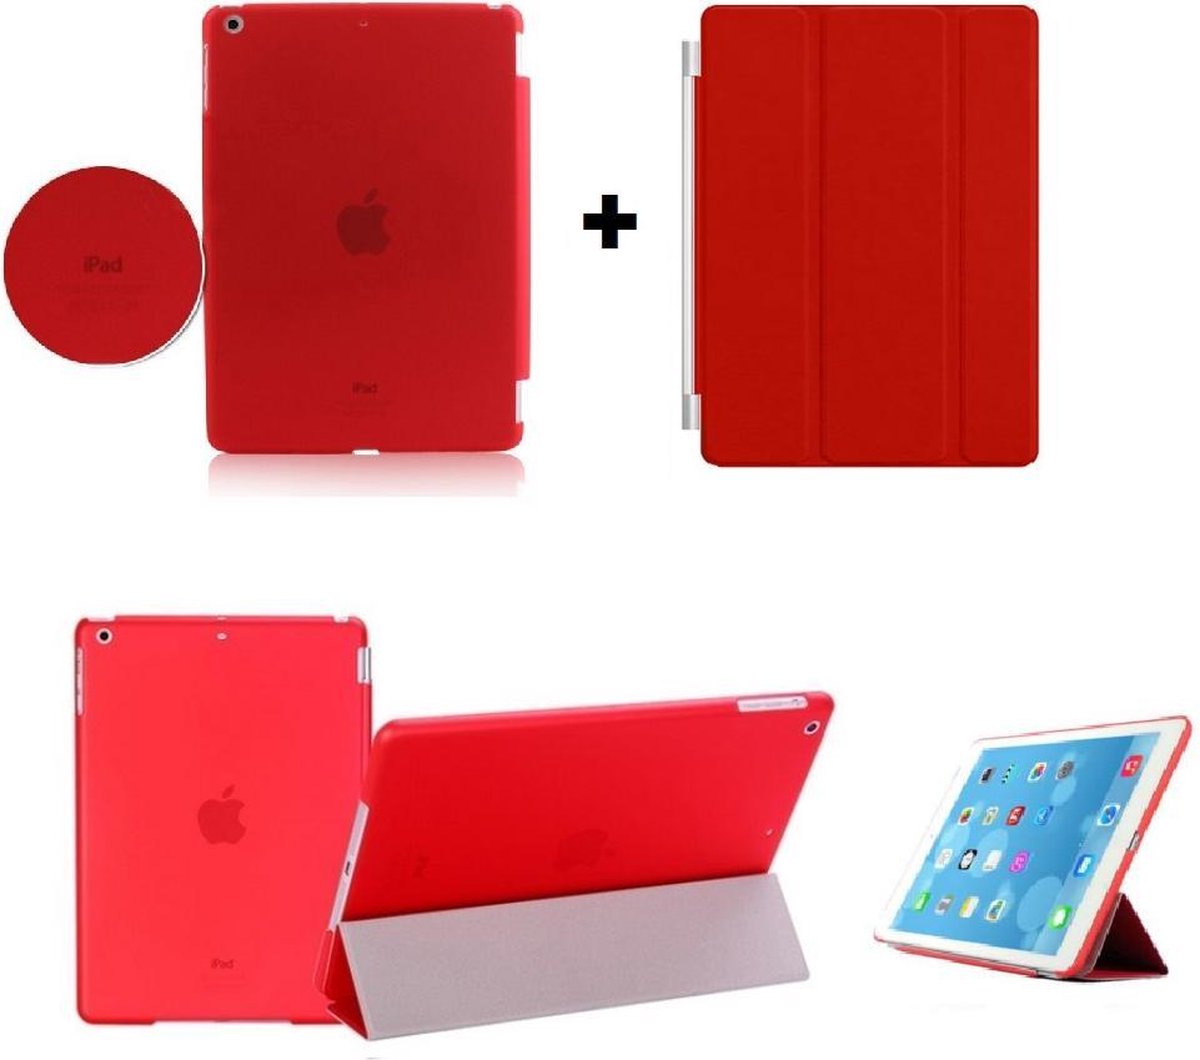 Apple iPad mini 1, 2, 3 Smart Cover met/inclusief Achterkant Back Cover Hoes Red/Rood Smartcover combinatie hoesje Companion Case Full Body | BetaalbareHoesjes.nl